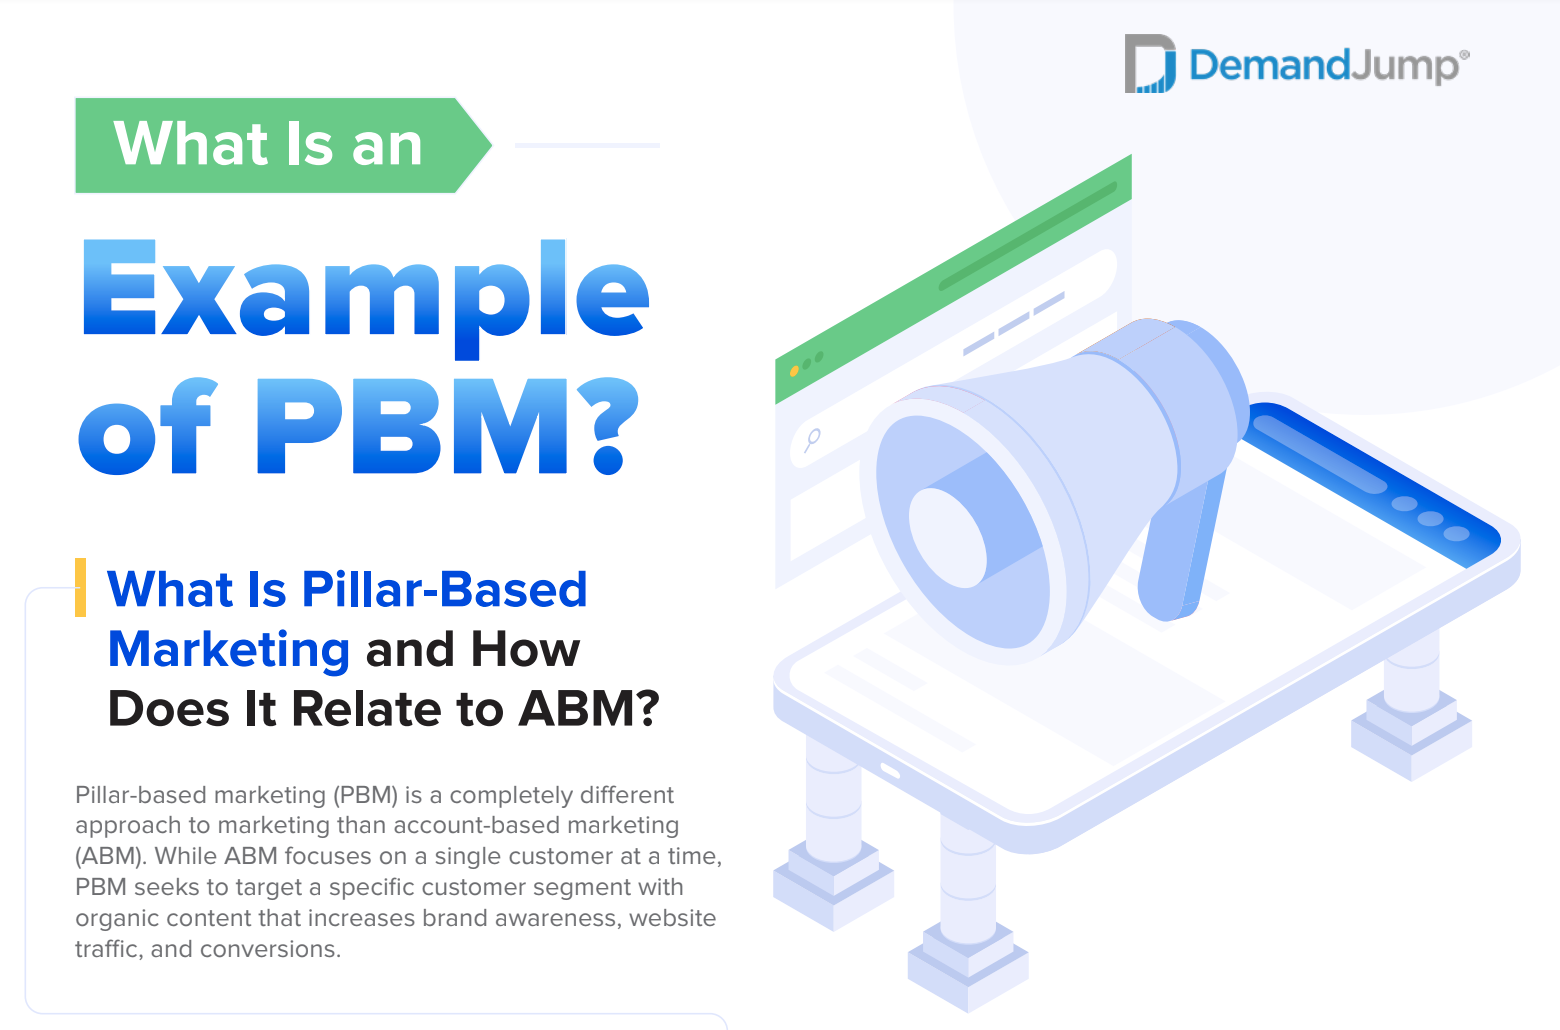 What Is an Example of PBM?